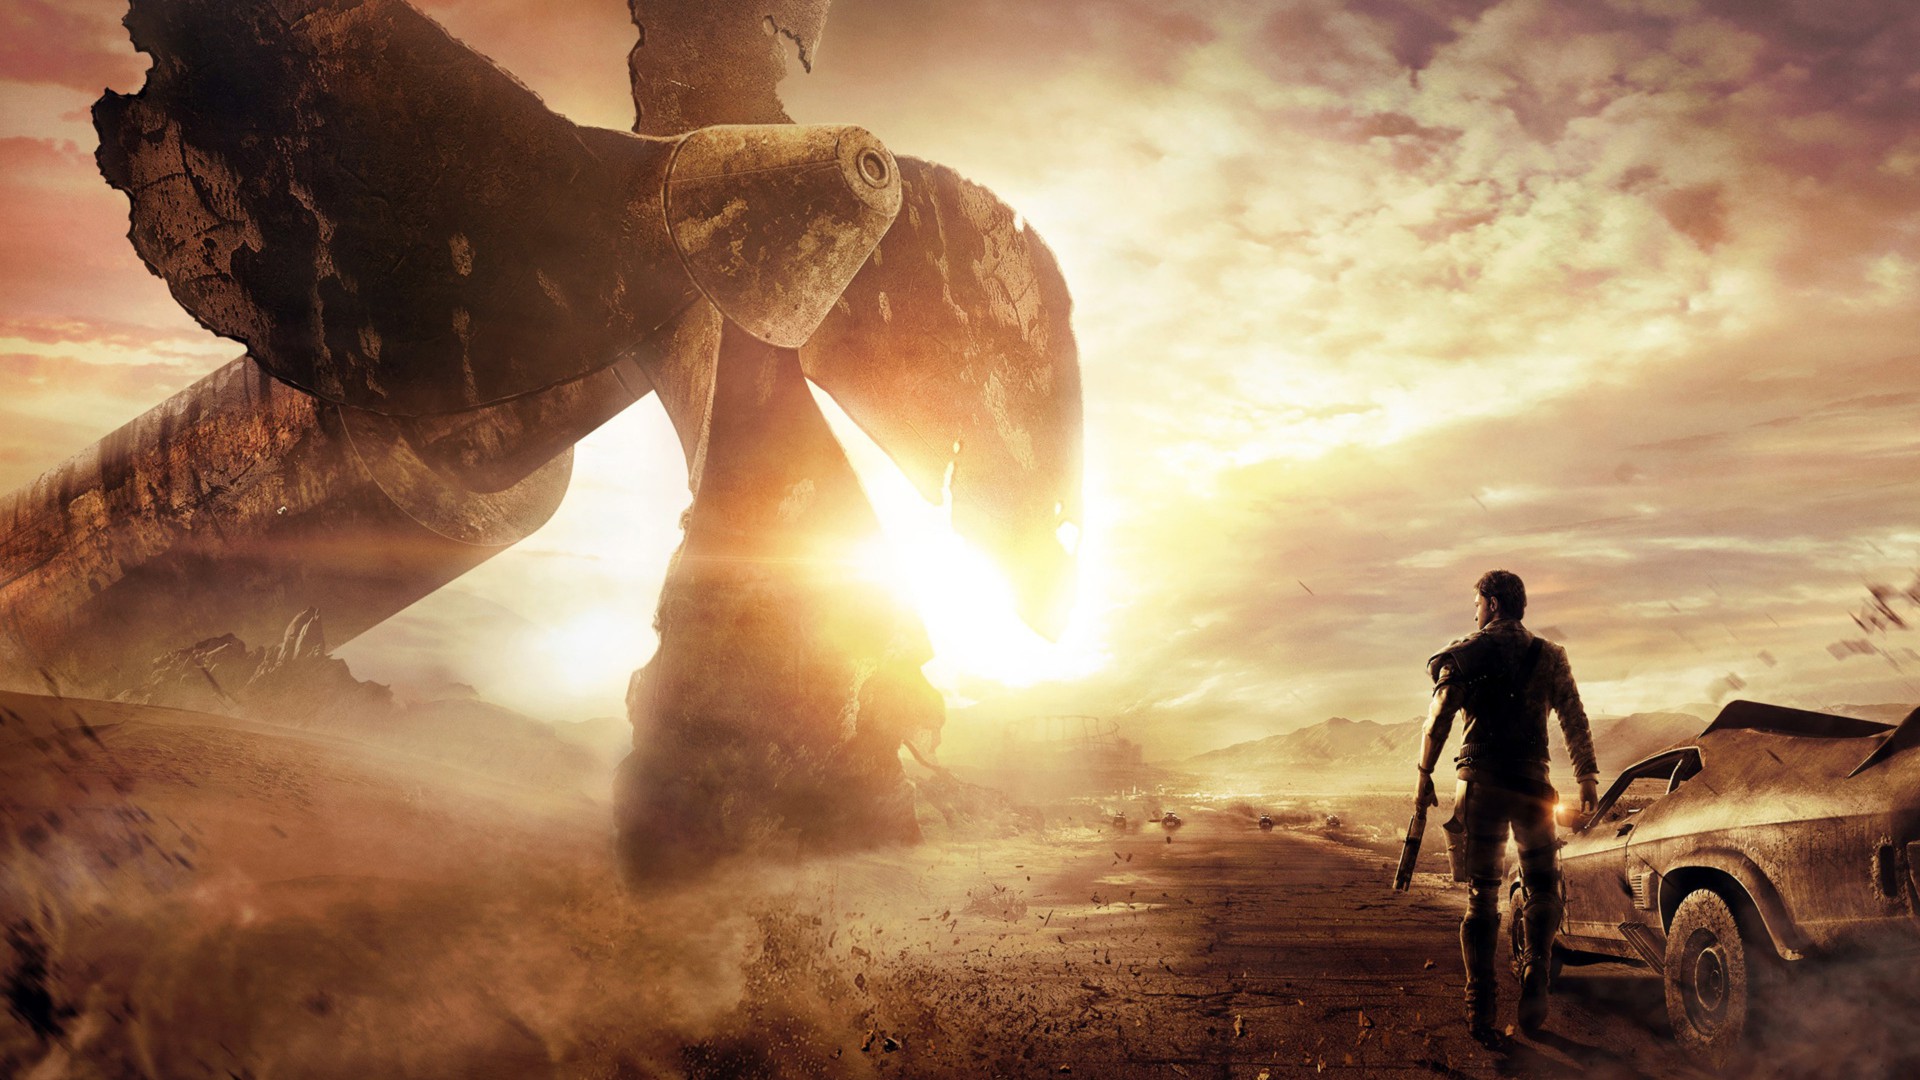 Mad Max Wallpaper Games Action Mad Max Best Games 2015 game